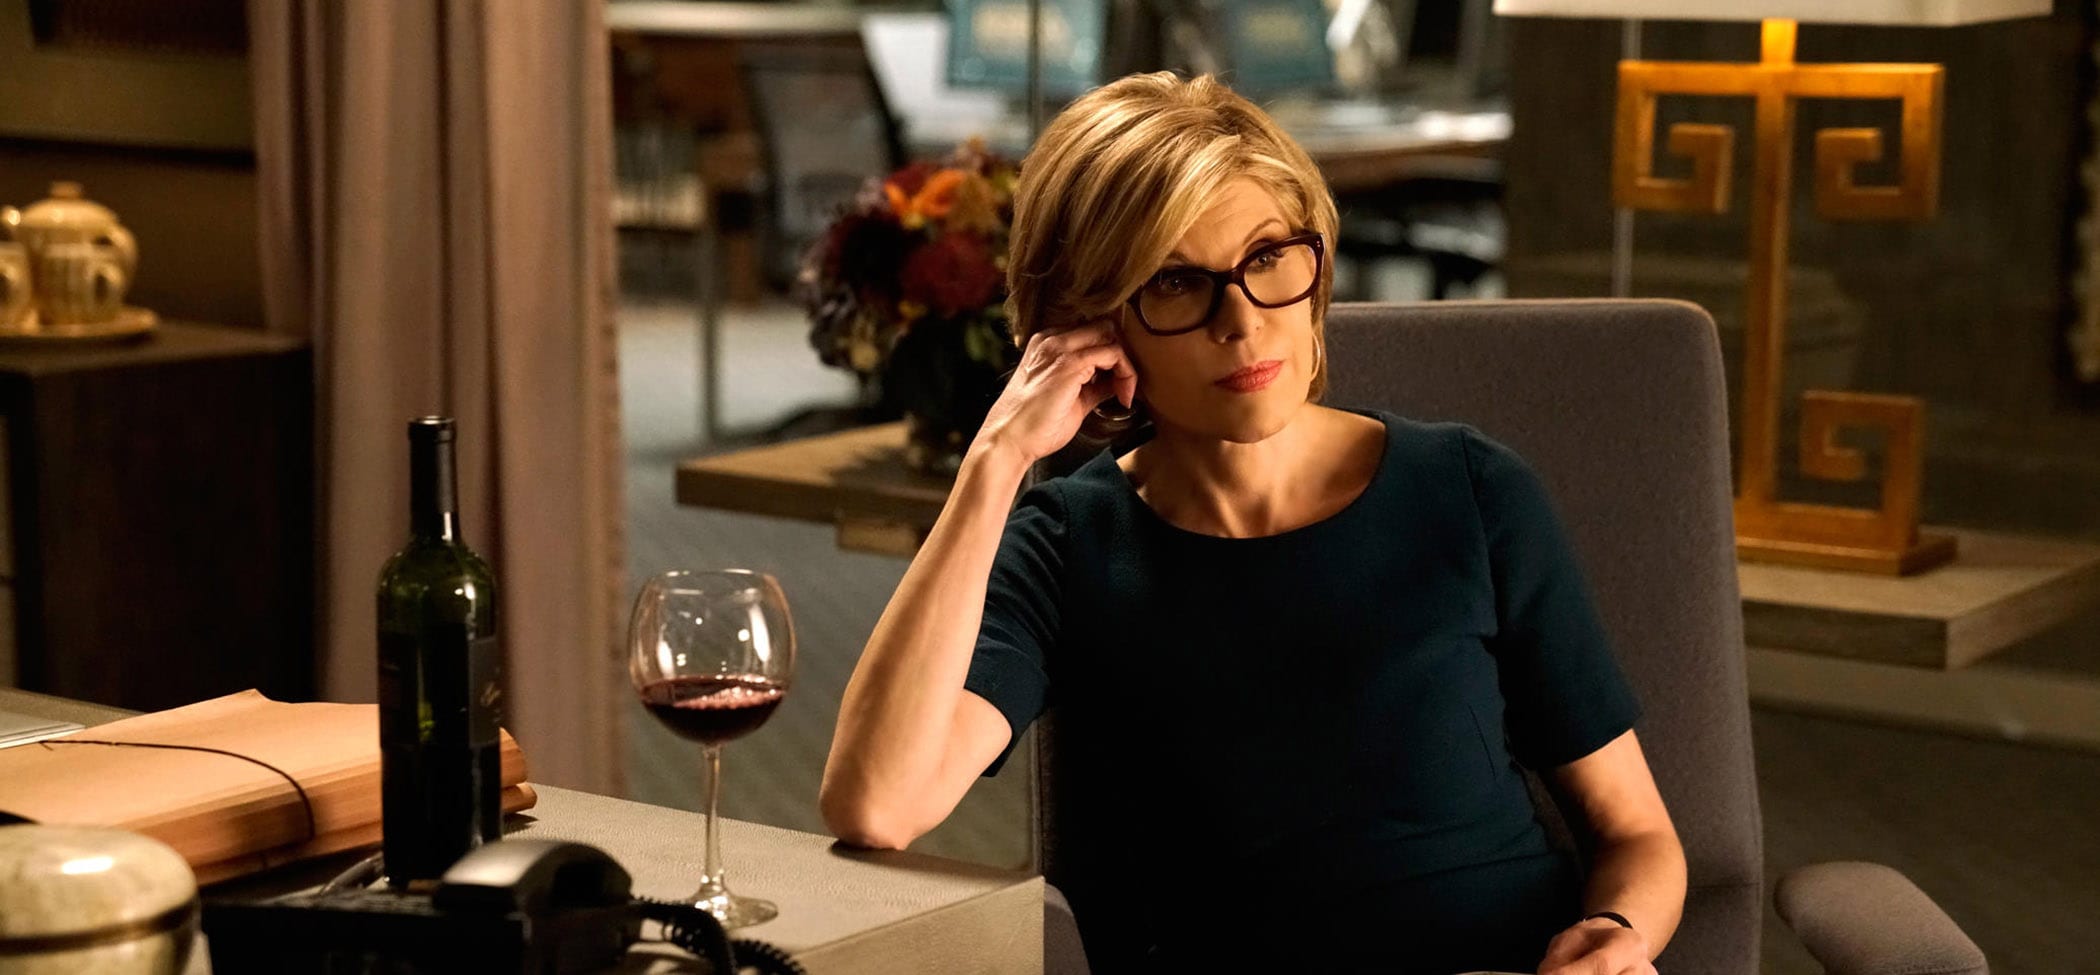 Christine Baranski has always been an absolute boss on TV and film. Here are her finest on-screen moments, including 'The Grinch' and 'Frasier'.